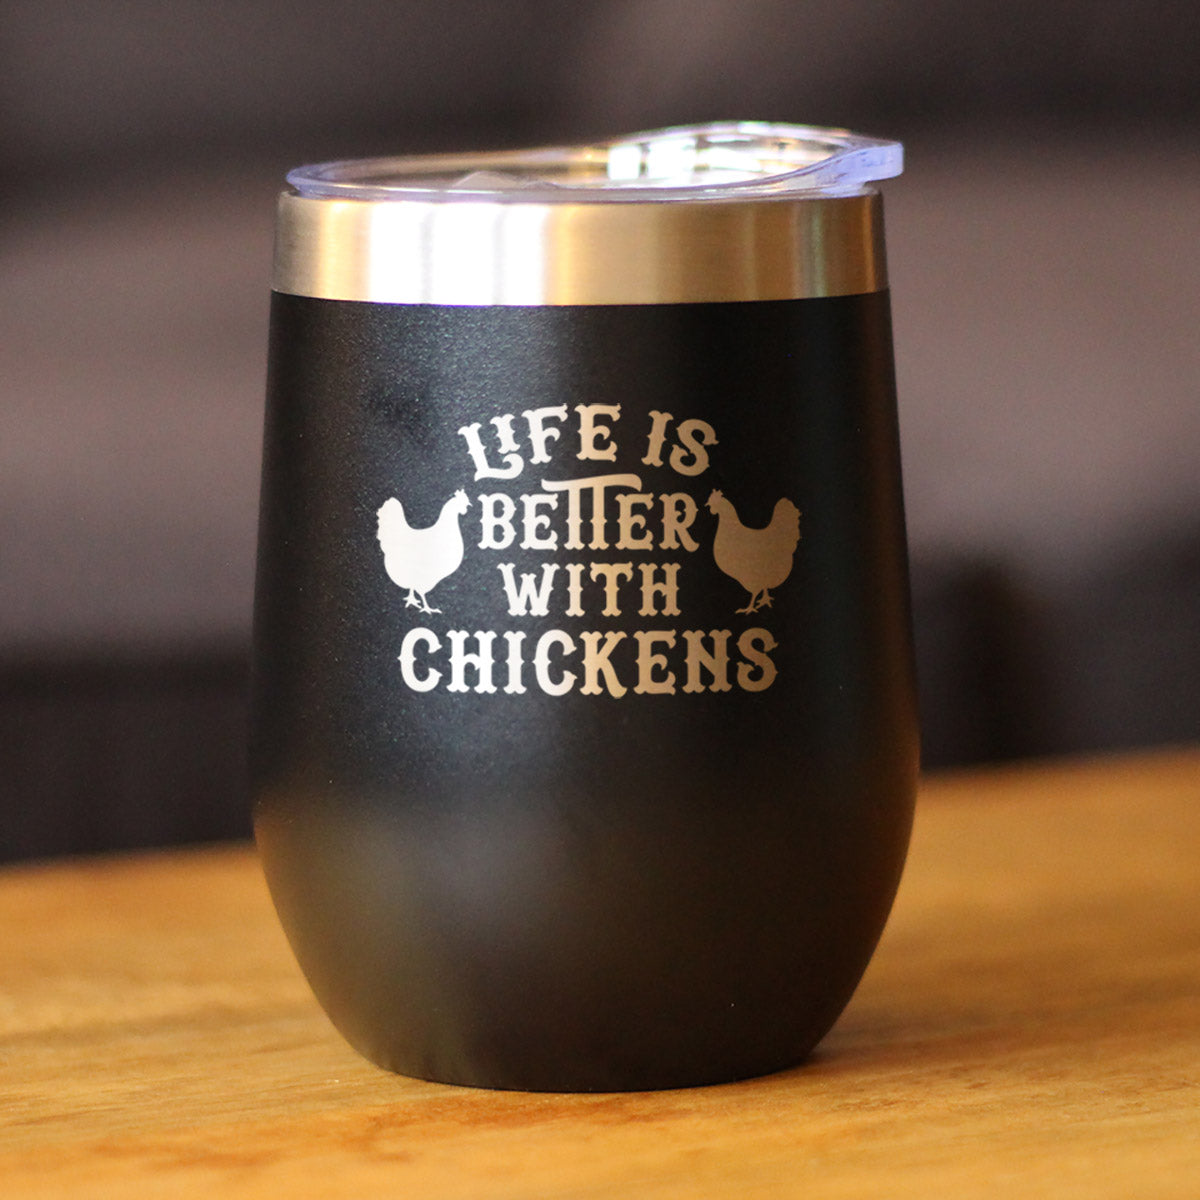 Life is Better with Chickens - Chicken Wine Tumbler with Sliding Lid - Stemless Stainless Steel Insulated Cup - Funny Outdoor Camping Mug